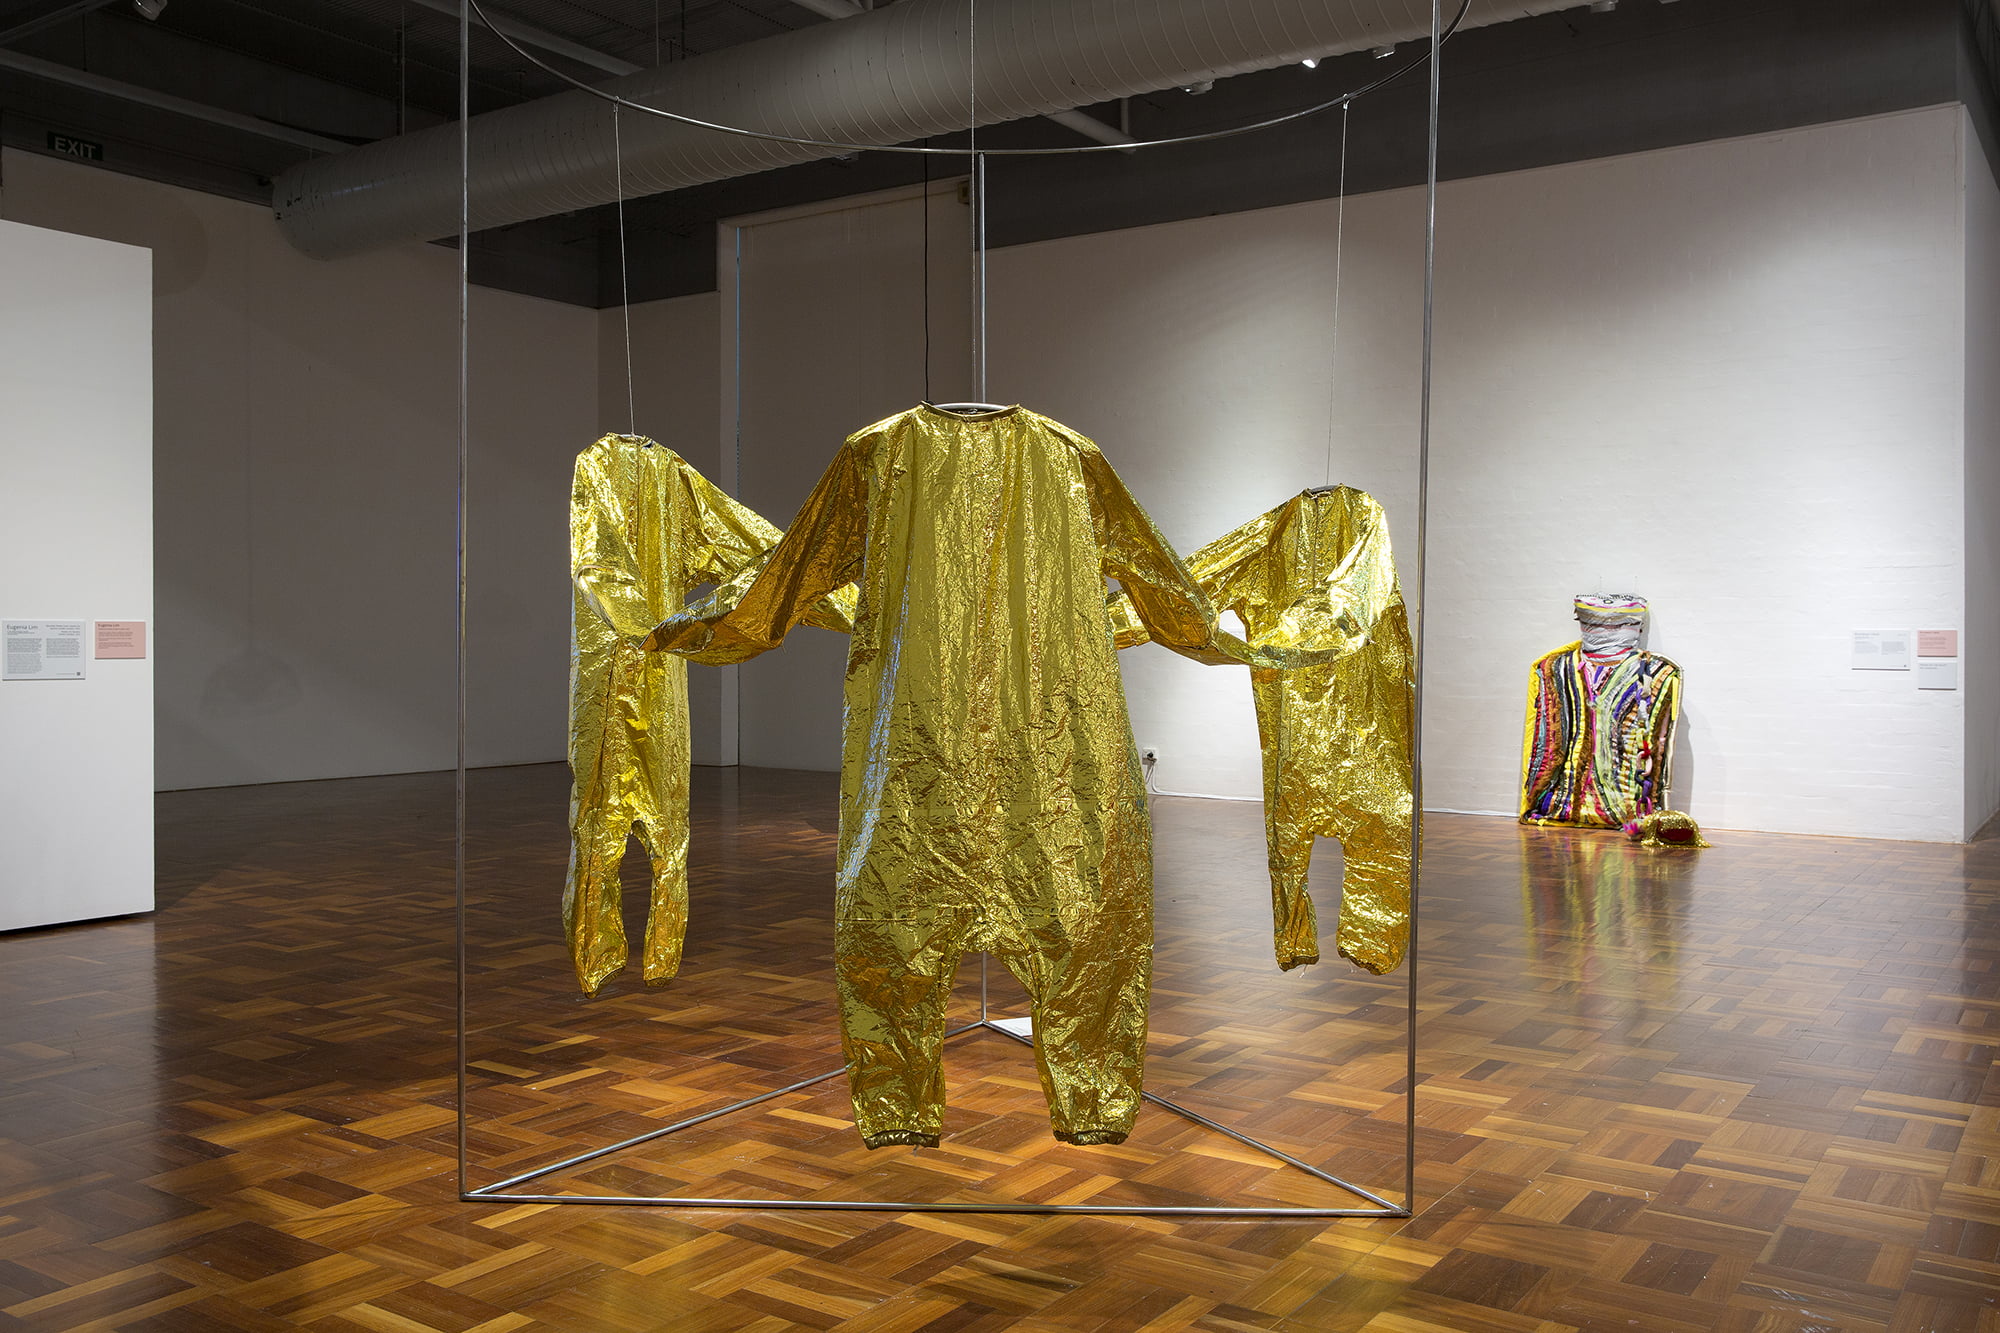 Installation view: Conflated
ANU School of Art & Design Gallery, 2022 Photograph: David Paterson